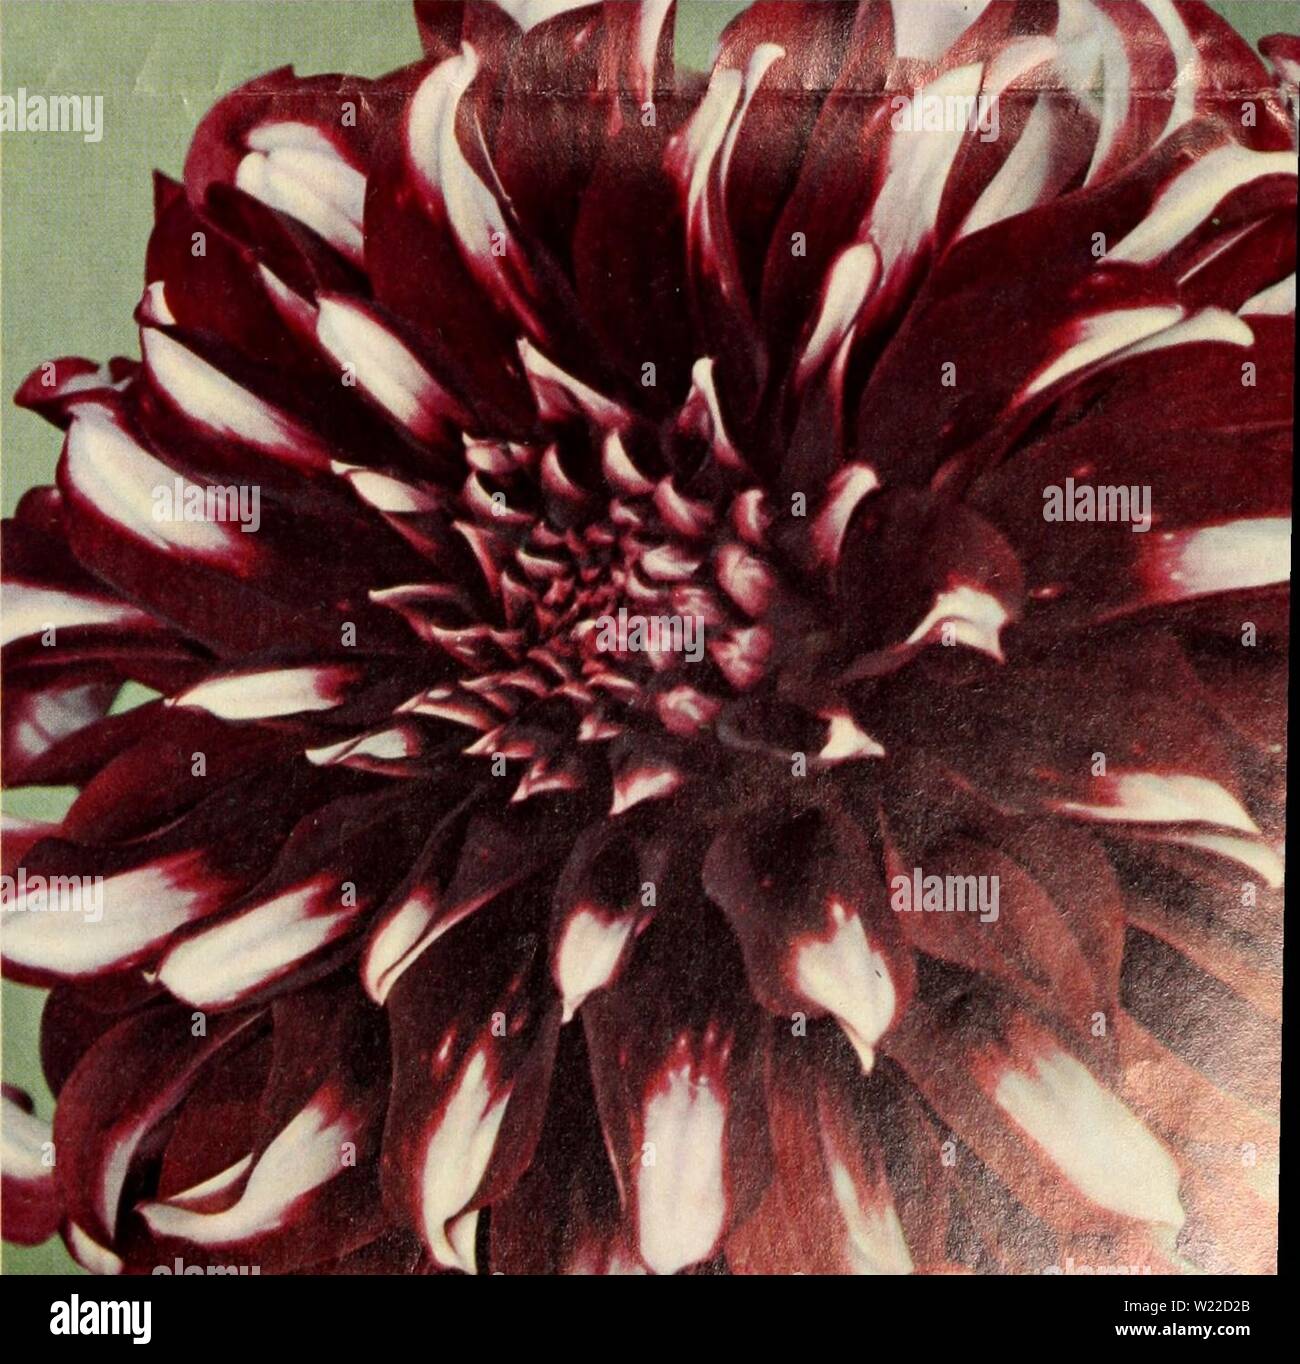 Archive image from page 10 of Dahlias  over 75 varieties. Dahlias : over 75 varieties offered in this special sales folder  dahliasover75var1959germ Year: 1959   SINCE 1871  CHEERIO Best Cutffower We Ever Grew Here is the ultimate in a showy garden and cutting variety . . . the self branching three foot bush is literally covered with the brightest 4 inch cherry red flow- ers you ever saw or imagined. :h petal tip is slightly touched with .' Cutflowers actually lasted for ome. Brighten up that dull corner it ral plants of 'Cheerio.' Order to-  limited, and there is no substitute No. 59-17 J f Stock Photo